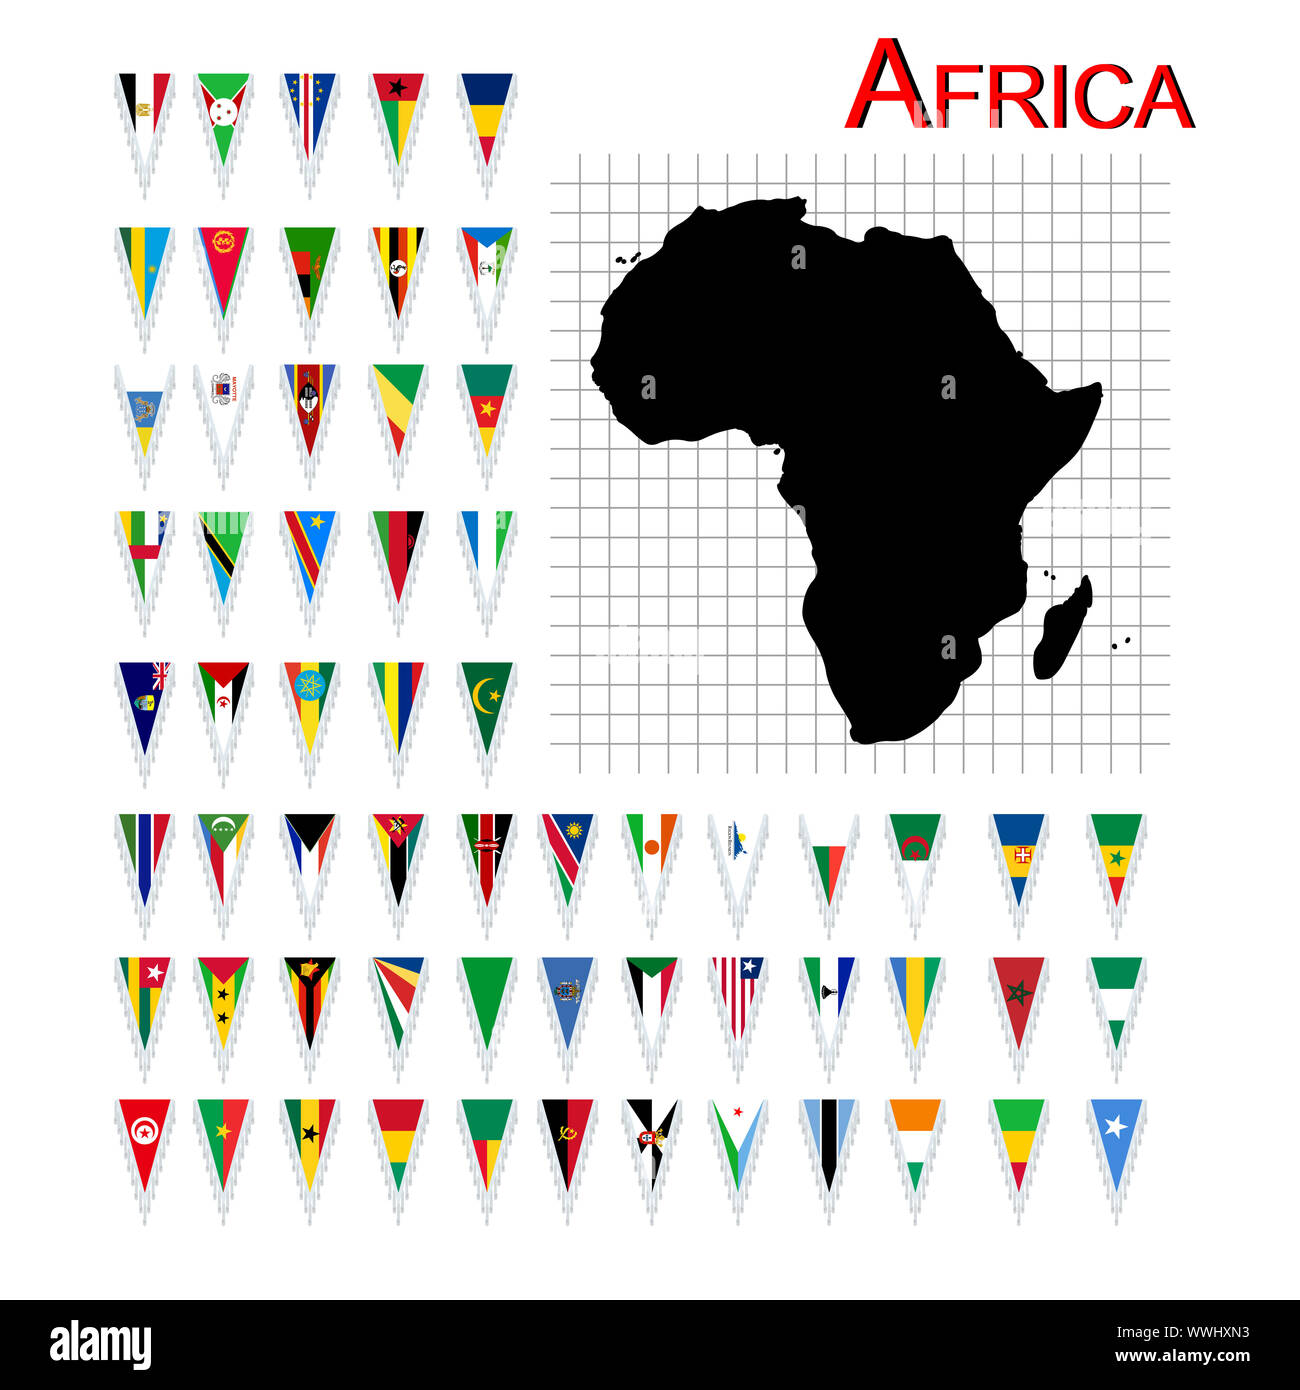 Complete set of African flags and map, isolated and grouped objects over white background Stock Photo